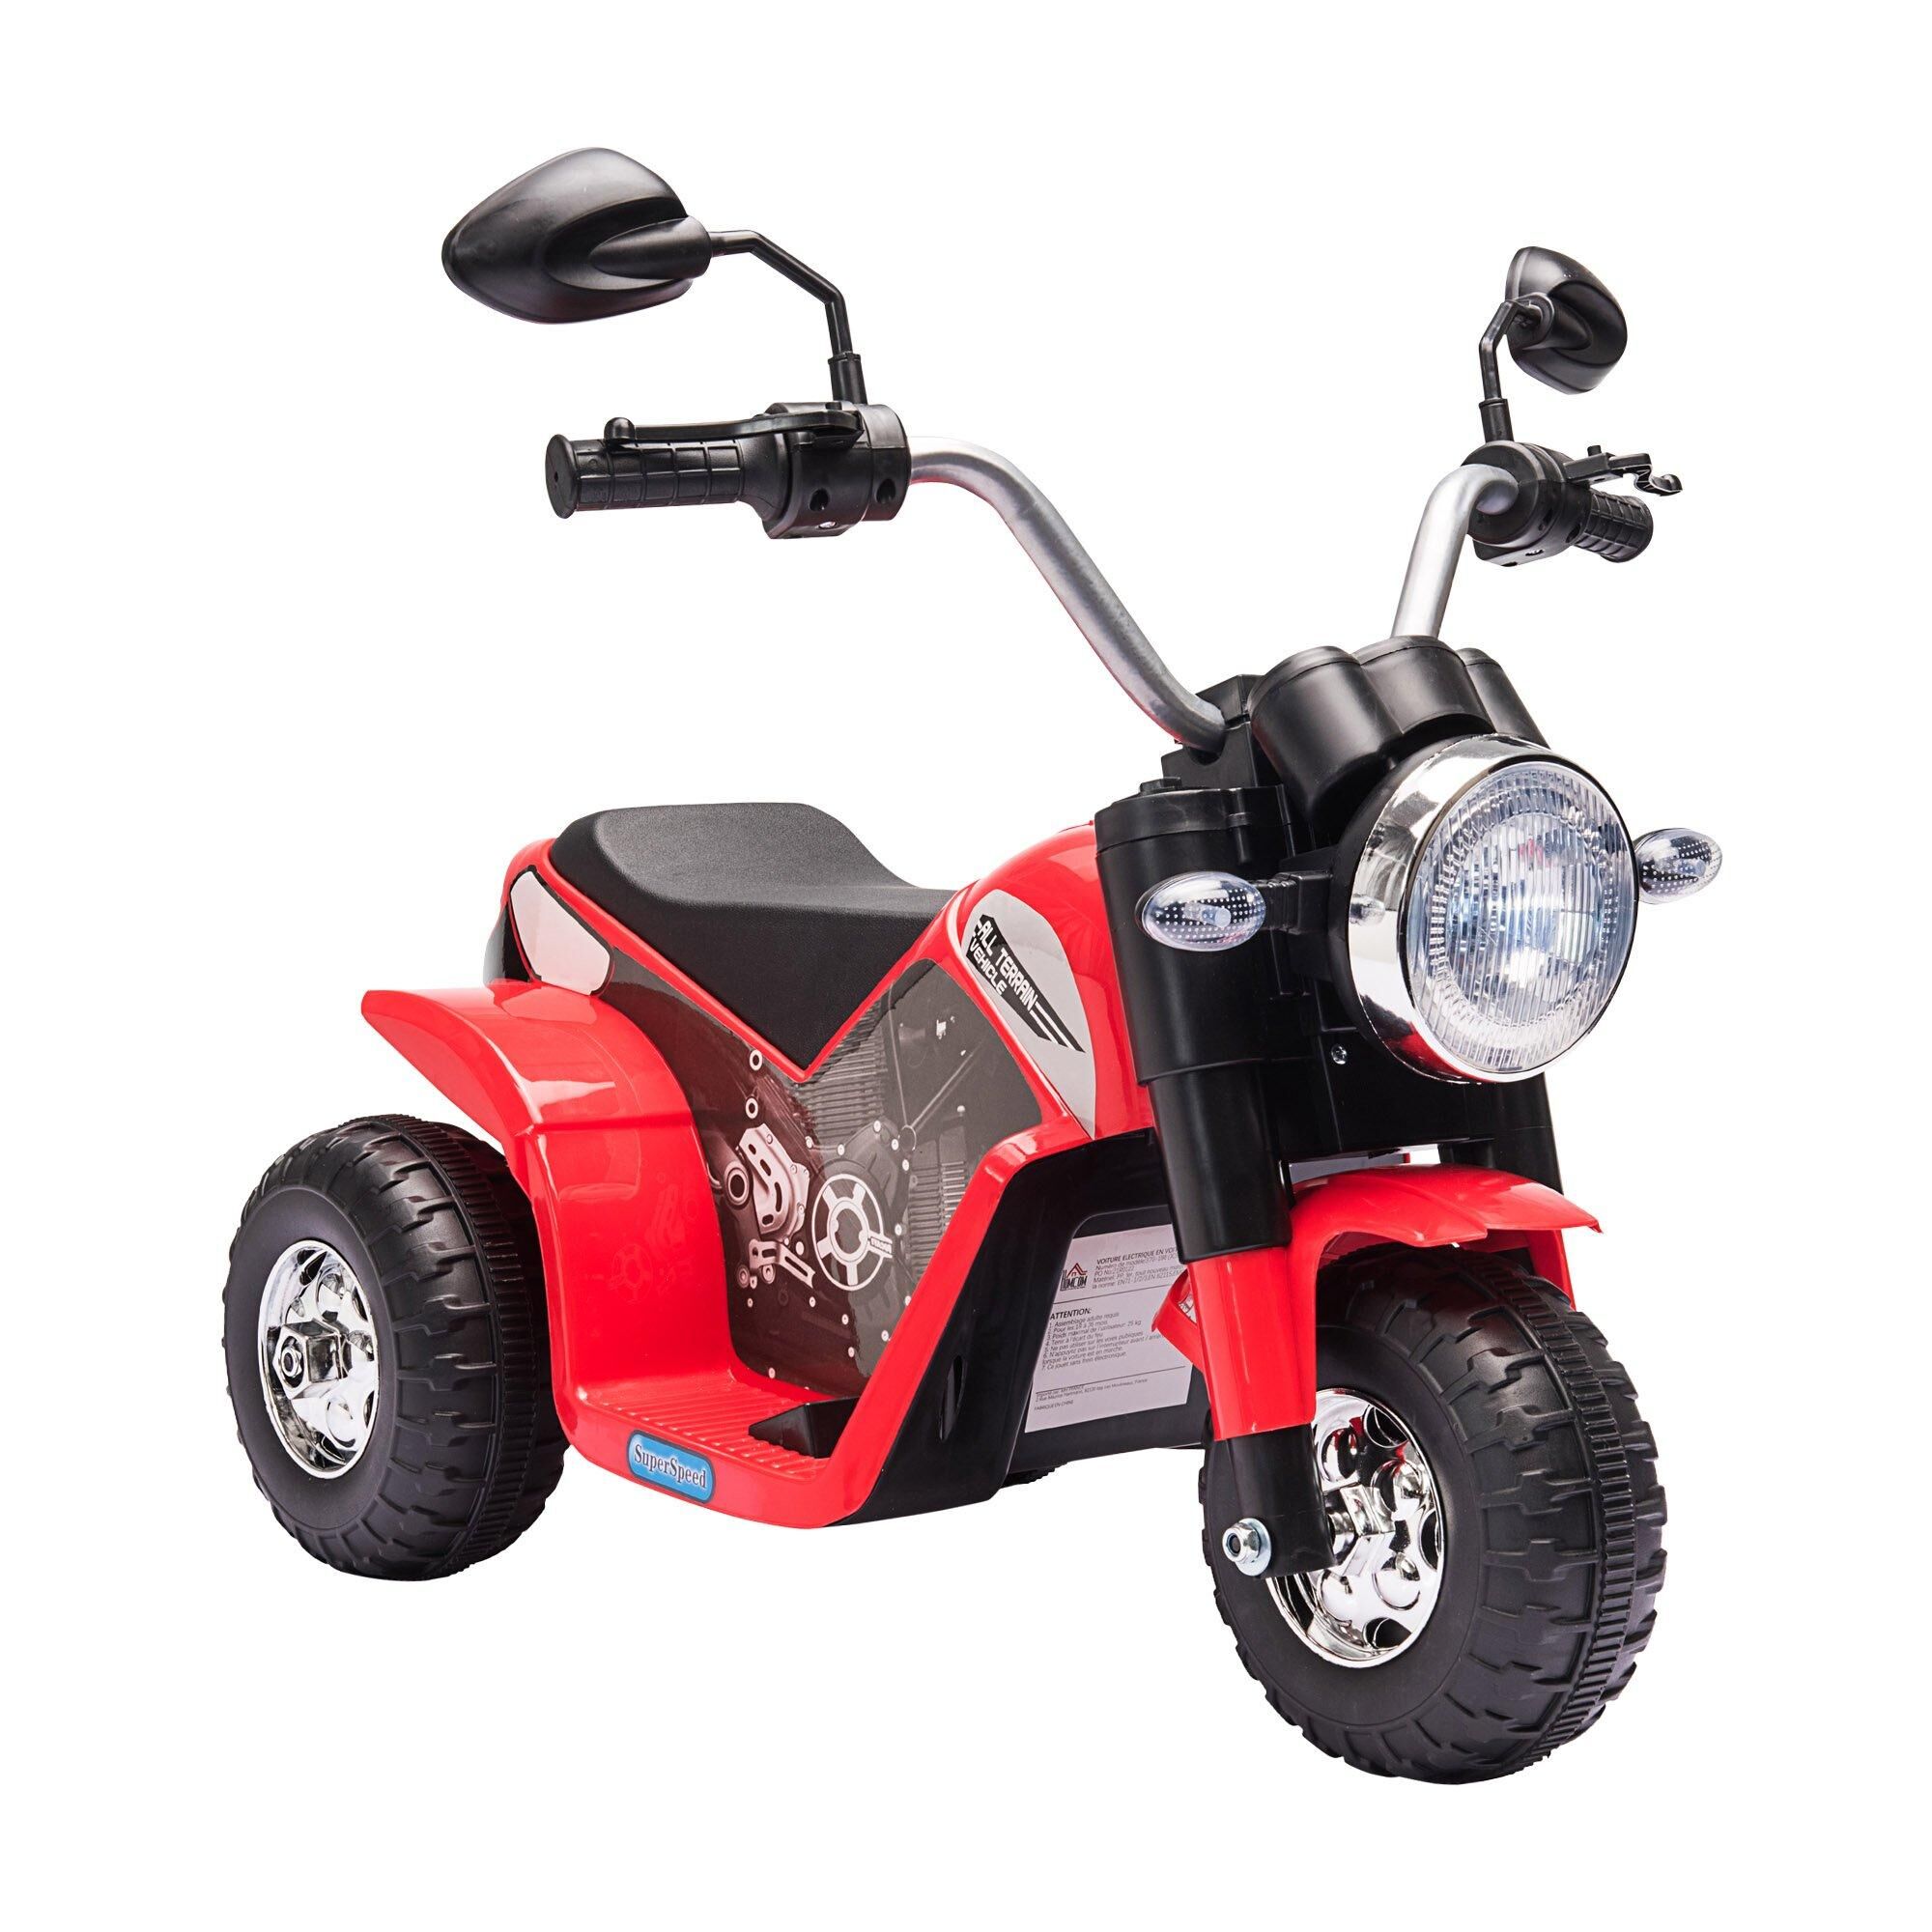 HOMCOM Kids Toddler 6V Electric Motorcycle Ride-On Toy Battery